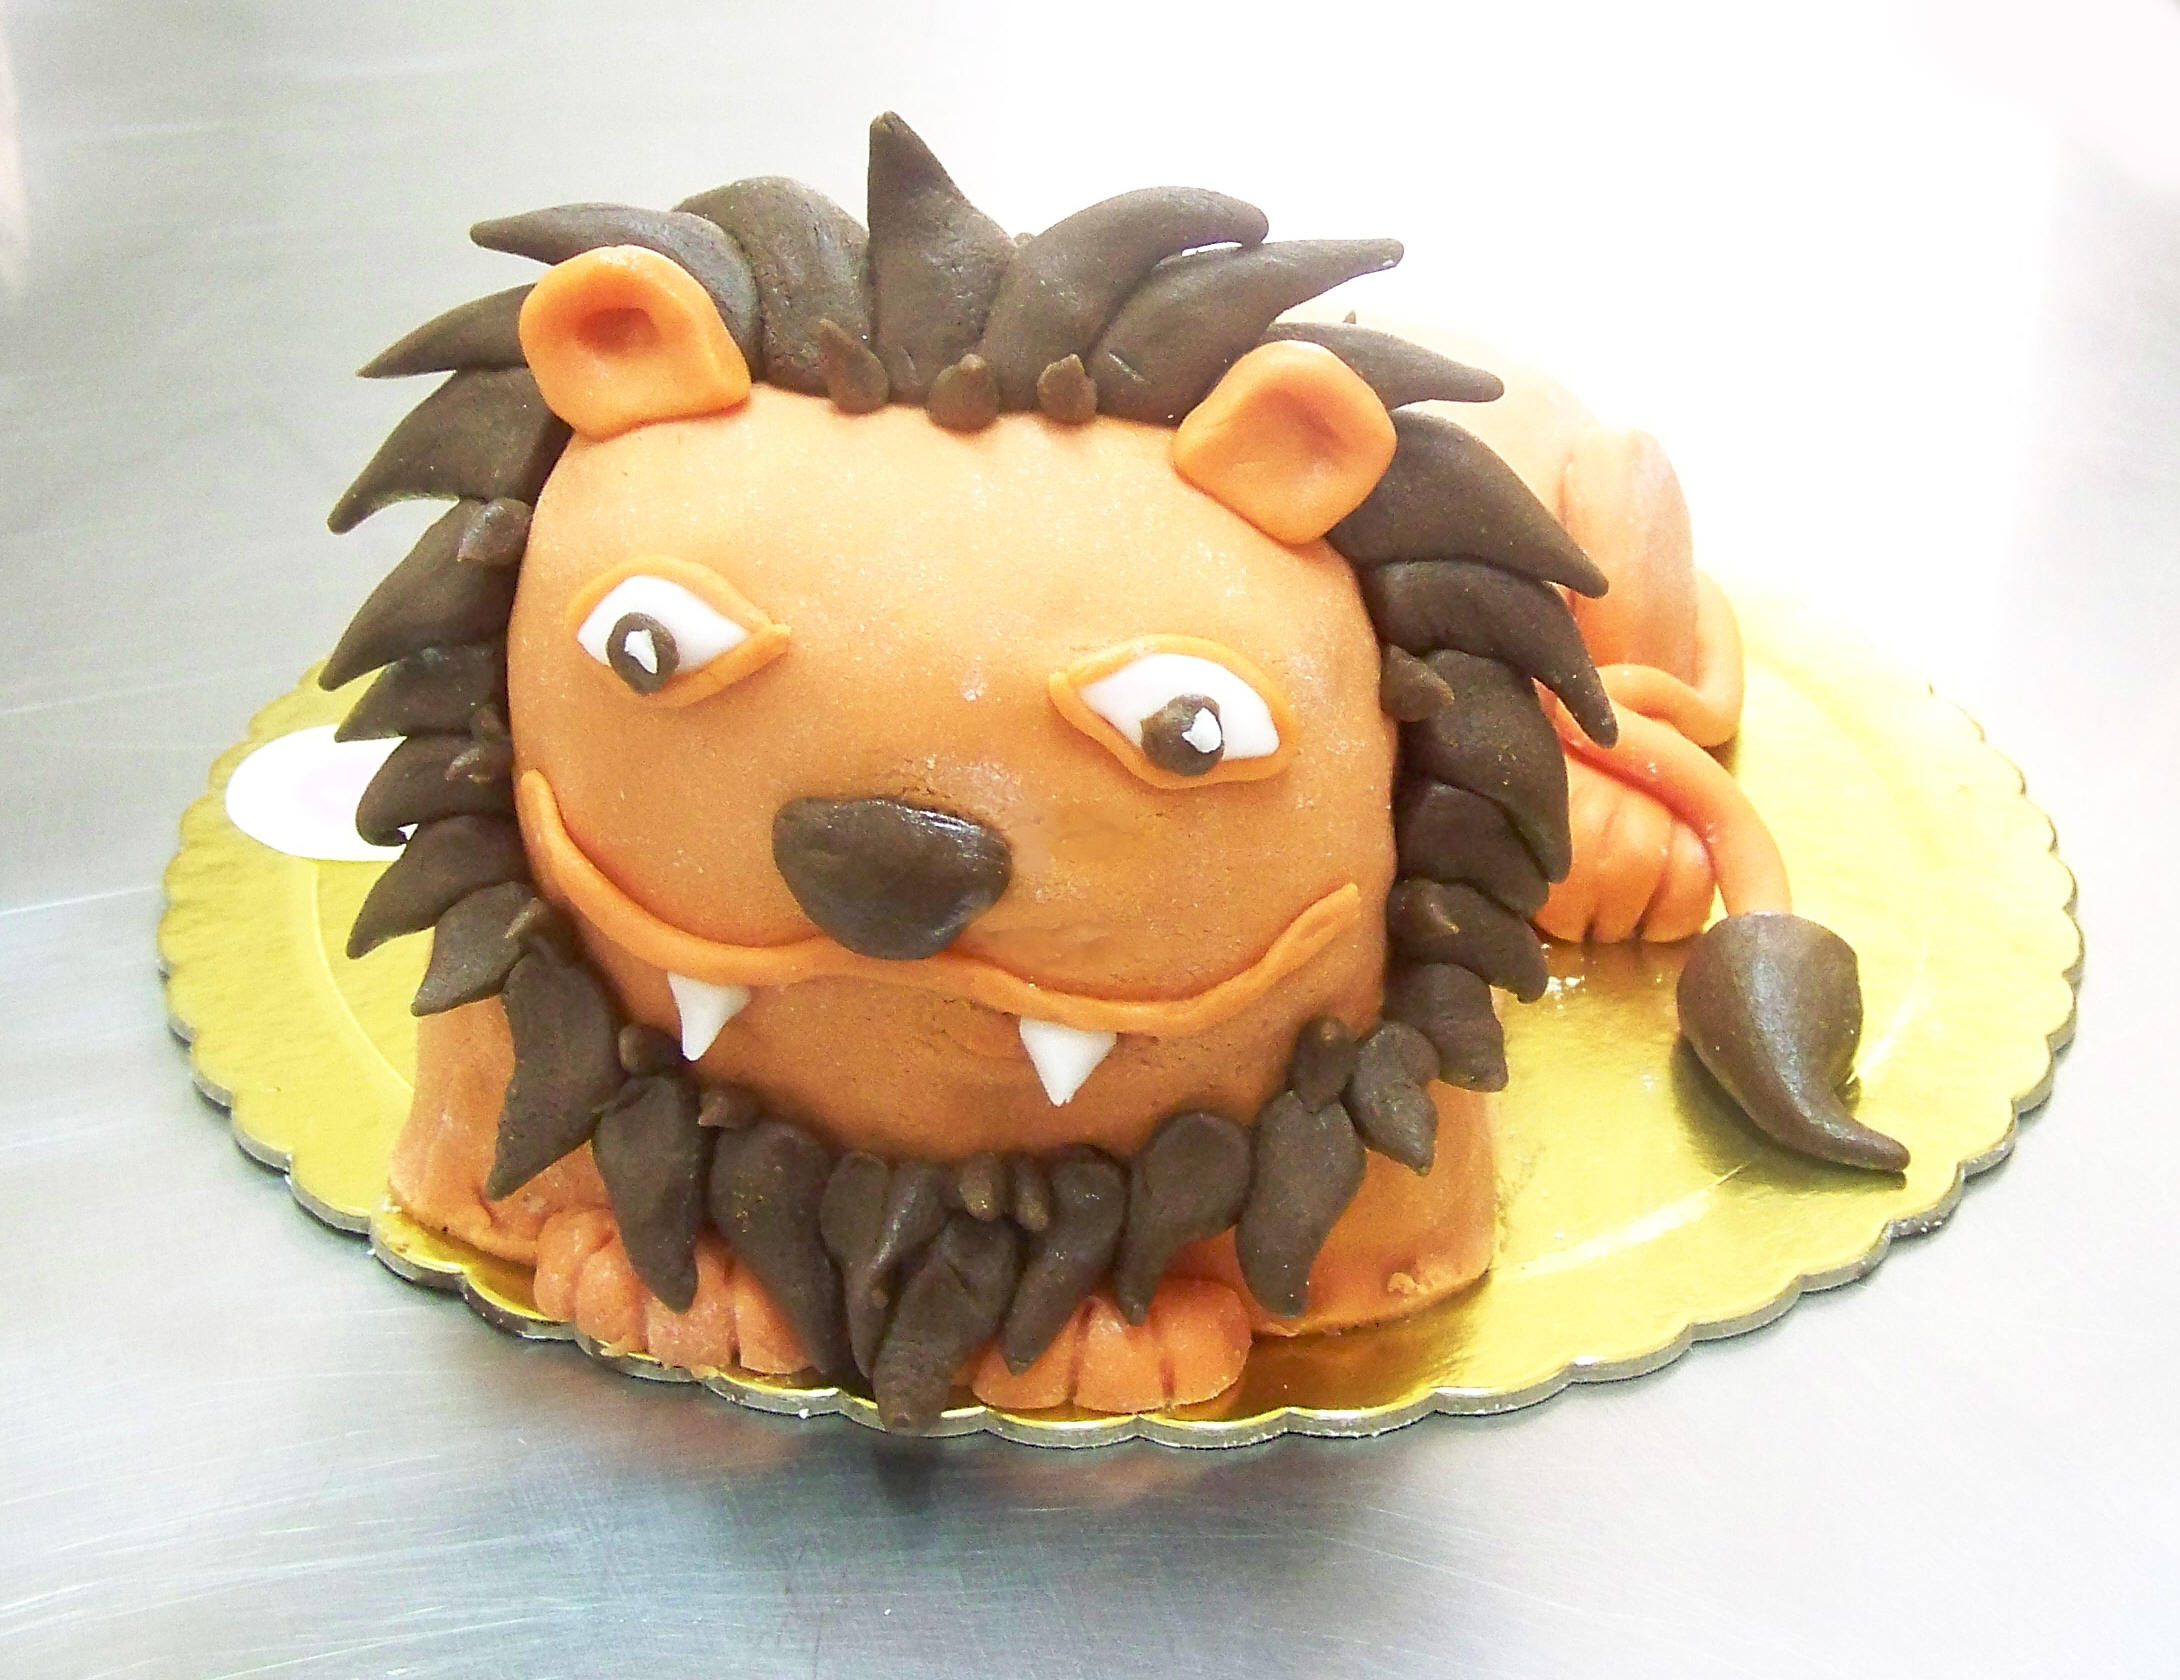 Coolest DIY Birthday Cakes | Lions - All Cakes